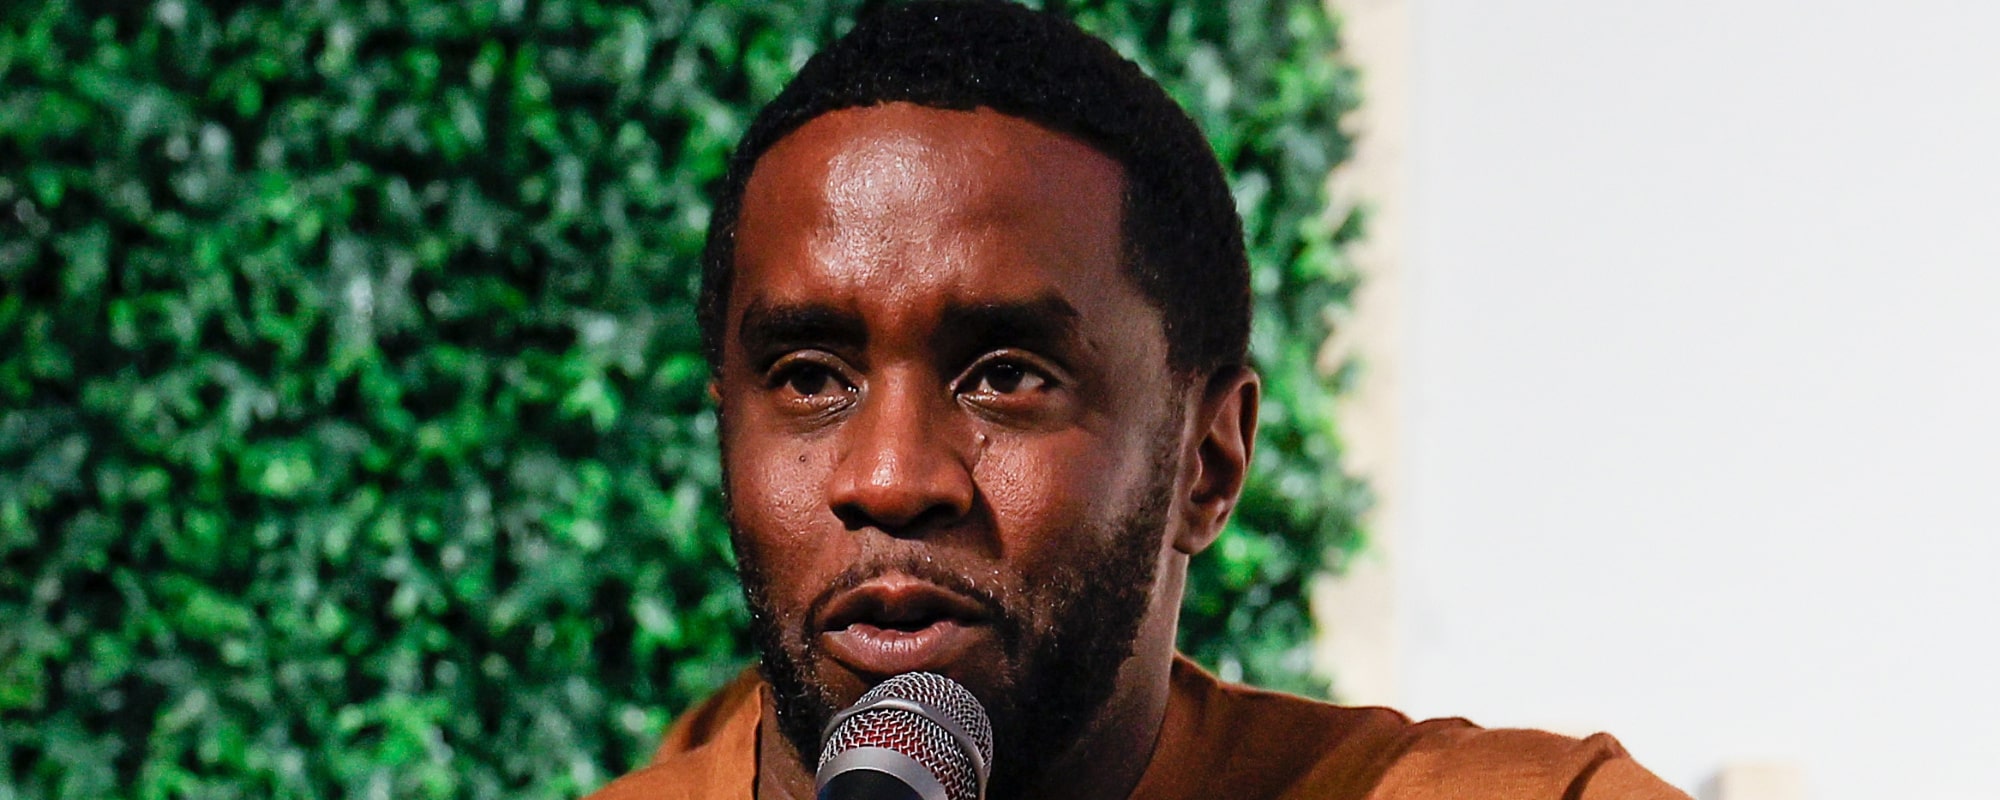 Homeland Security Raided Multiple Properties Owned by Sean “Diddy” Combs in Connection with a Sex Trafficking Investigation